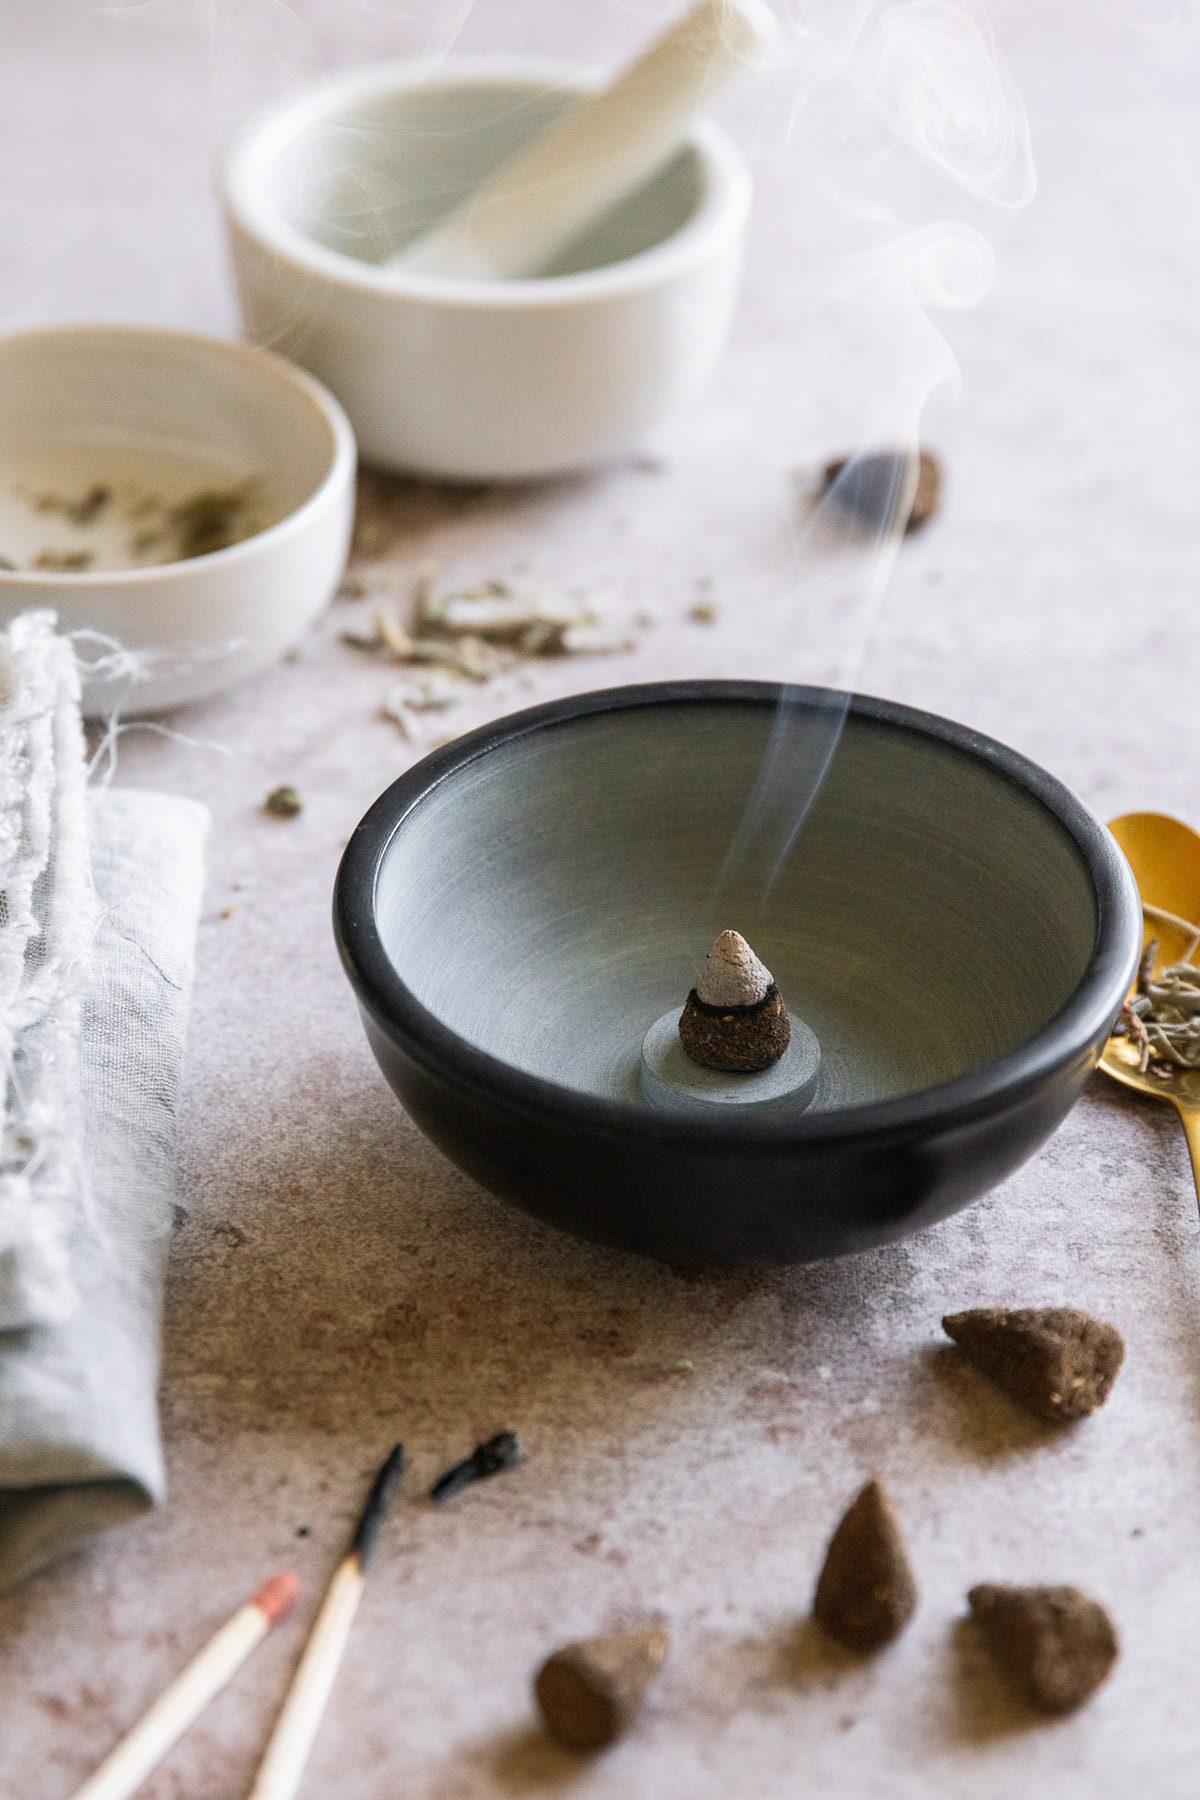 Here’s how to make your own DIY incense with just 3 ingredients.